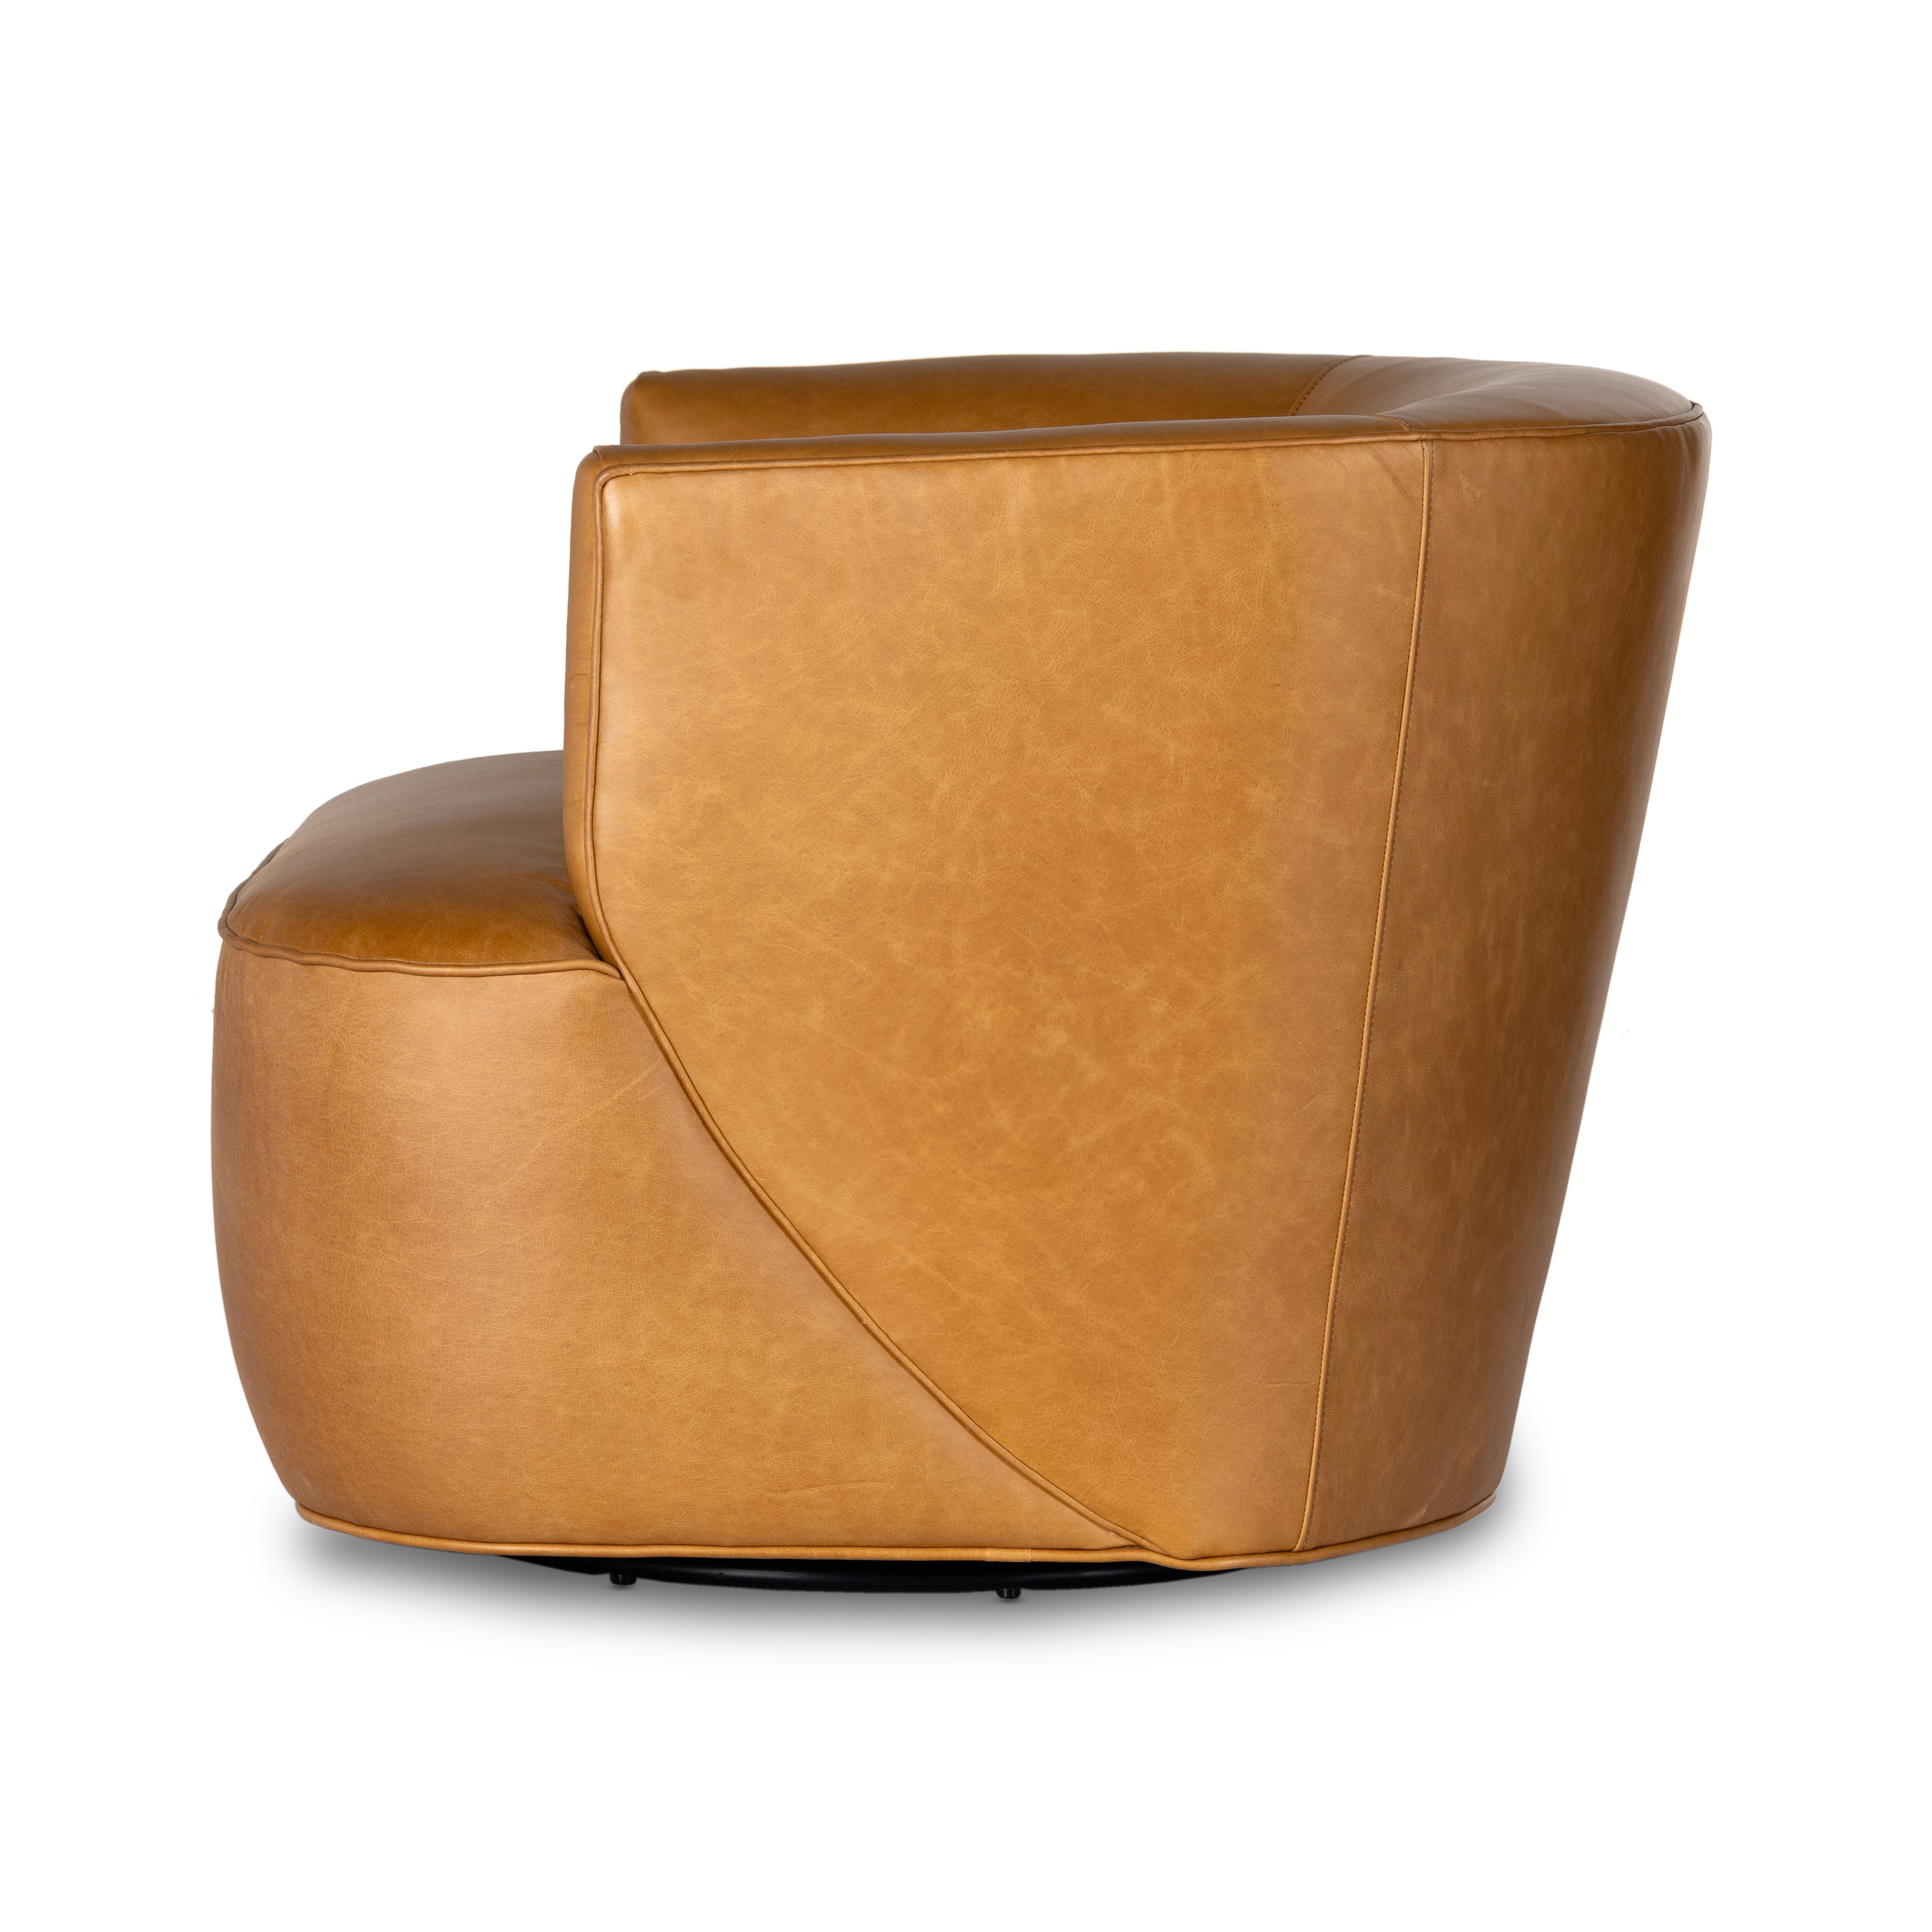 Supple, camel-colored top-grain leather hugs the curves of this modern-shaped seat, featuring a hidden 360-degree swivel. Amethyst Home provides interior design, new construction, custom furniture, and area rugs in the Boston metro area.